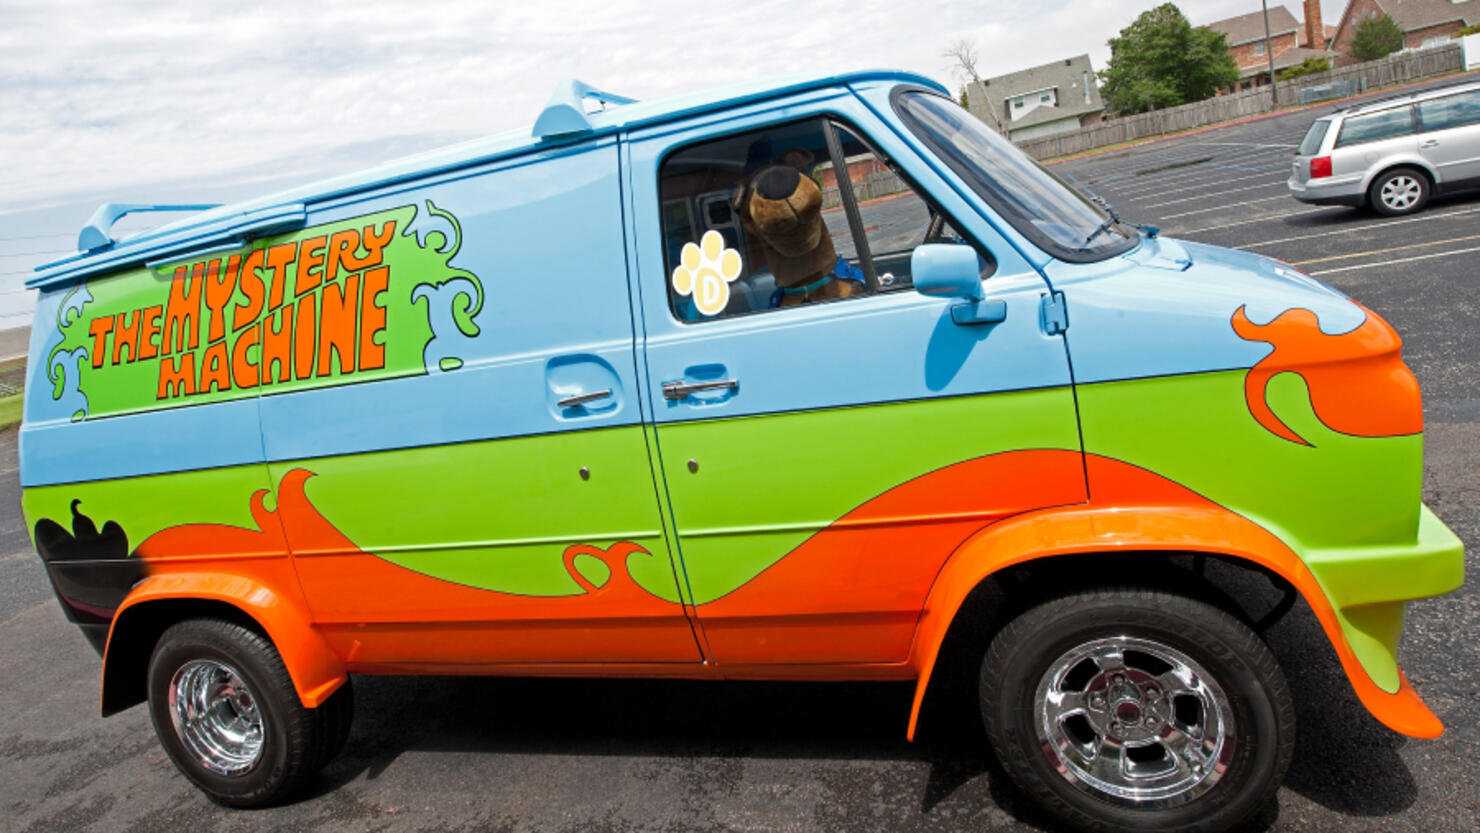 The Mystery Machine From 'ScoobyDoo' Up For Sale In North Carolina